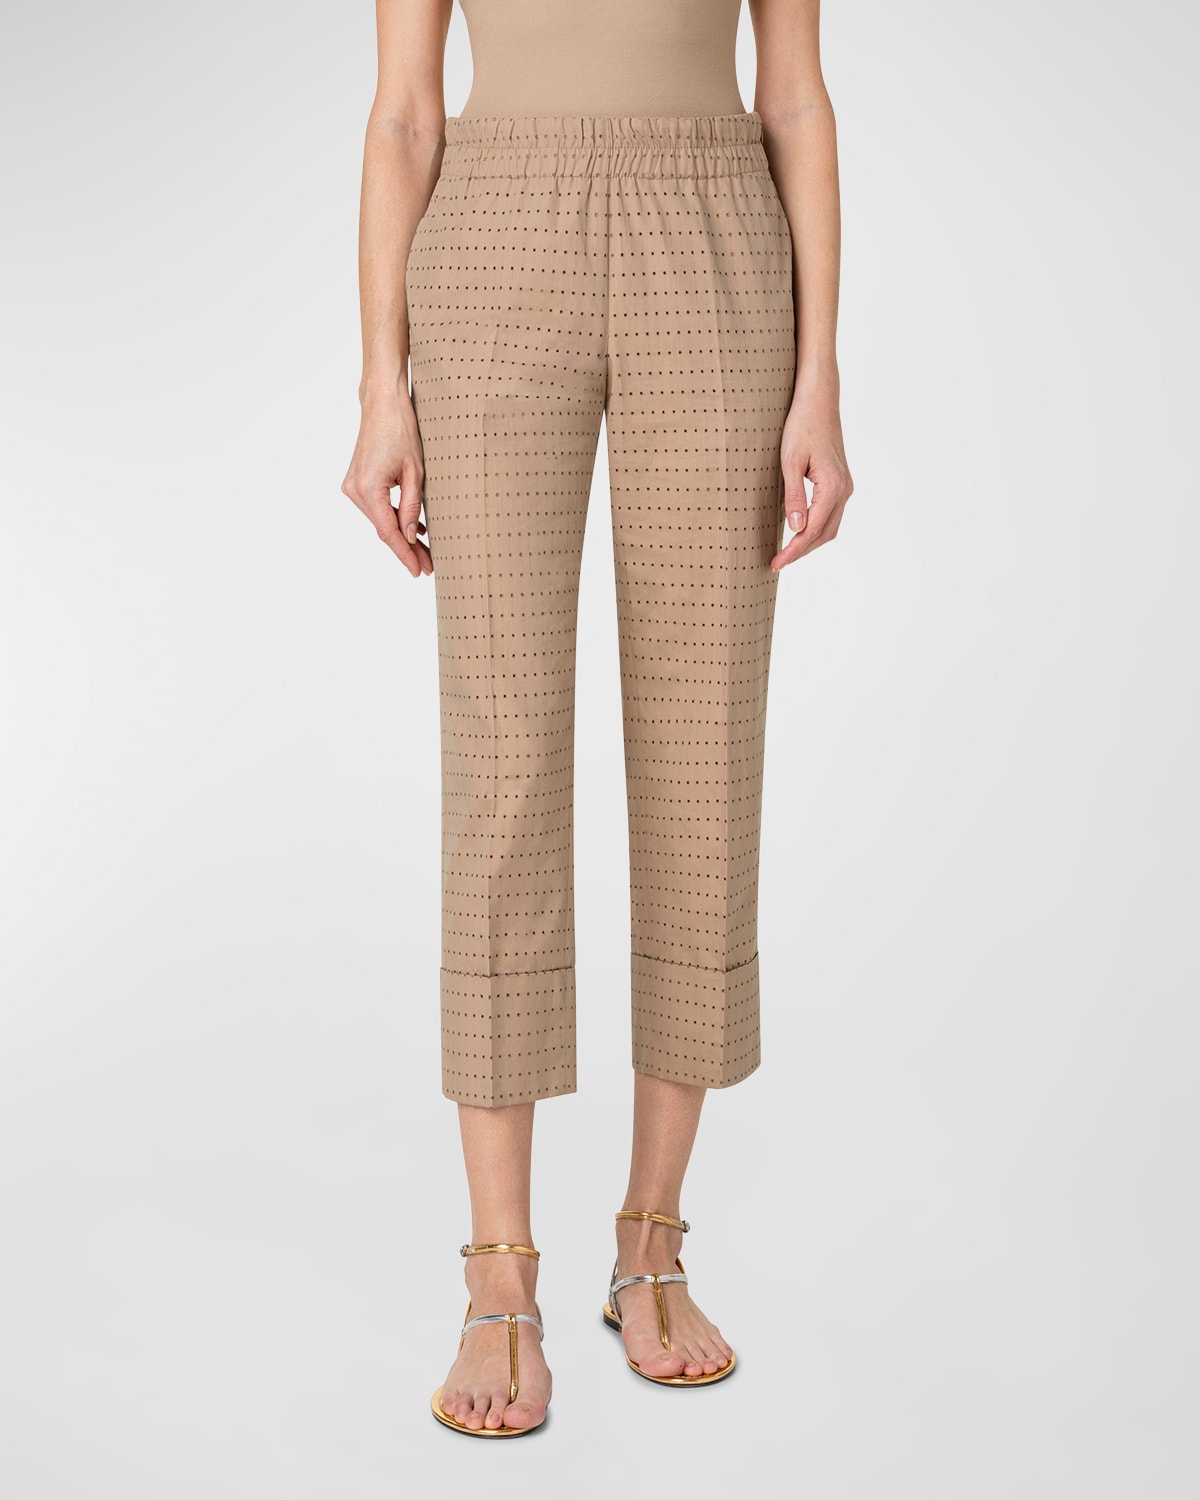 AKRIS PUNTO FARELL PERFORATED PIN DOT EMBROIDERED STRAIGHT-LEG CROP PANTS